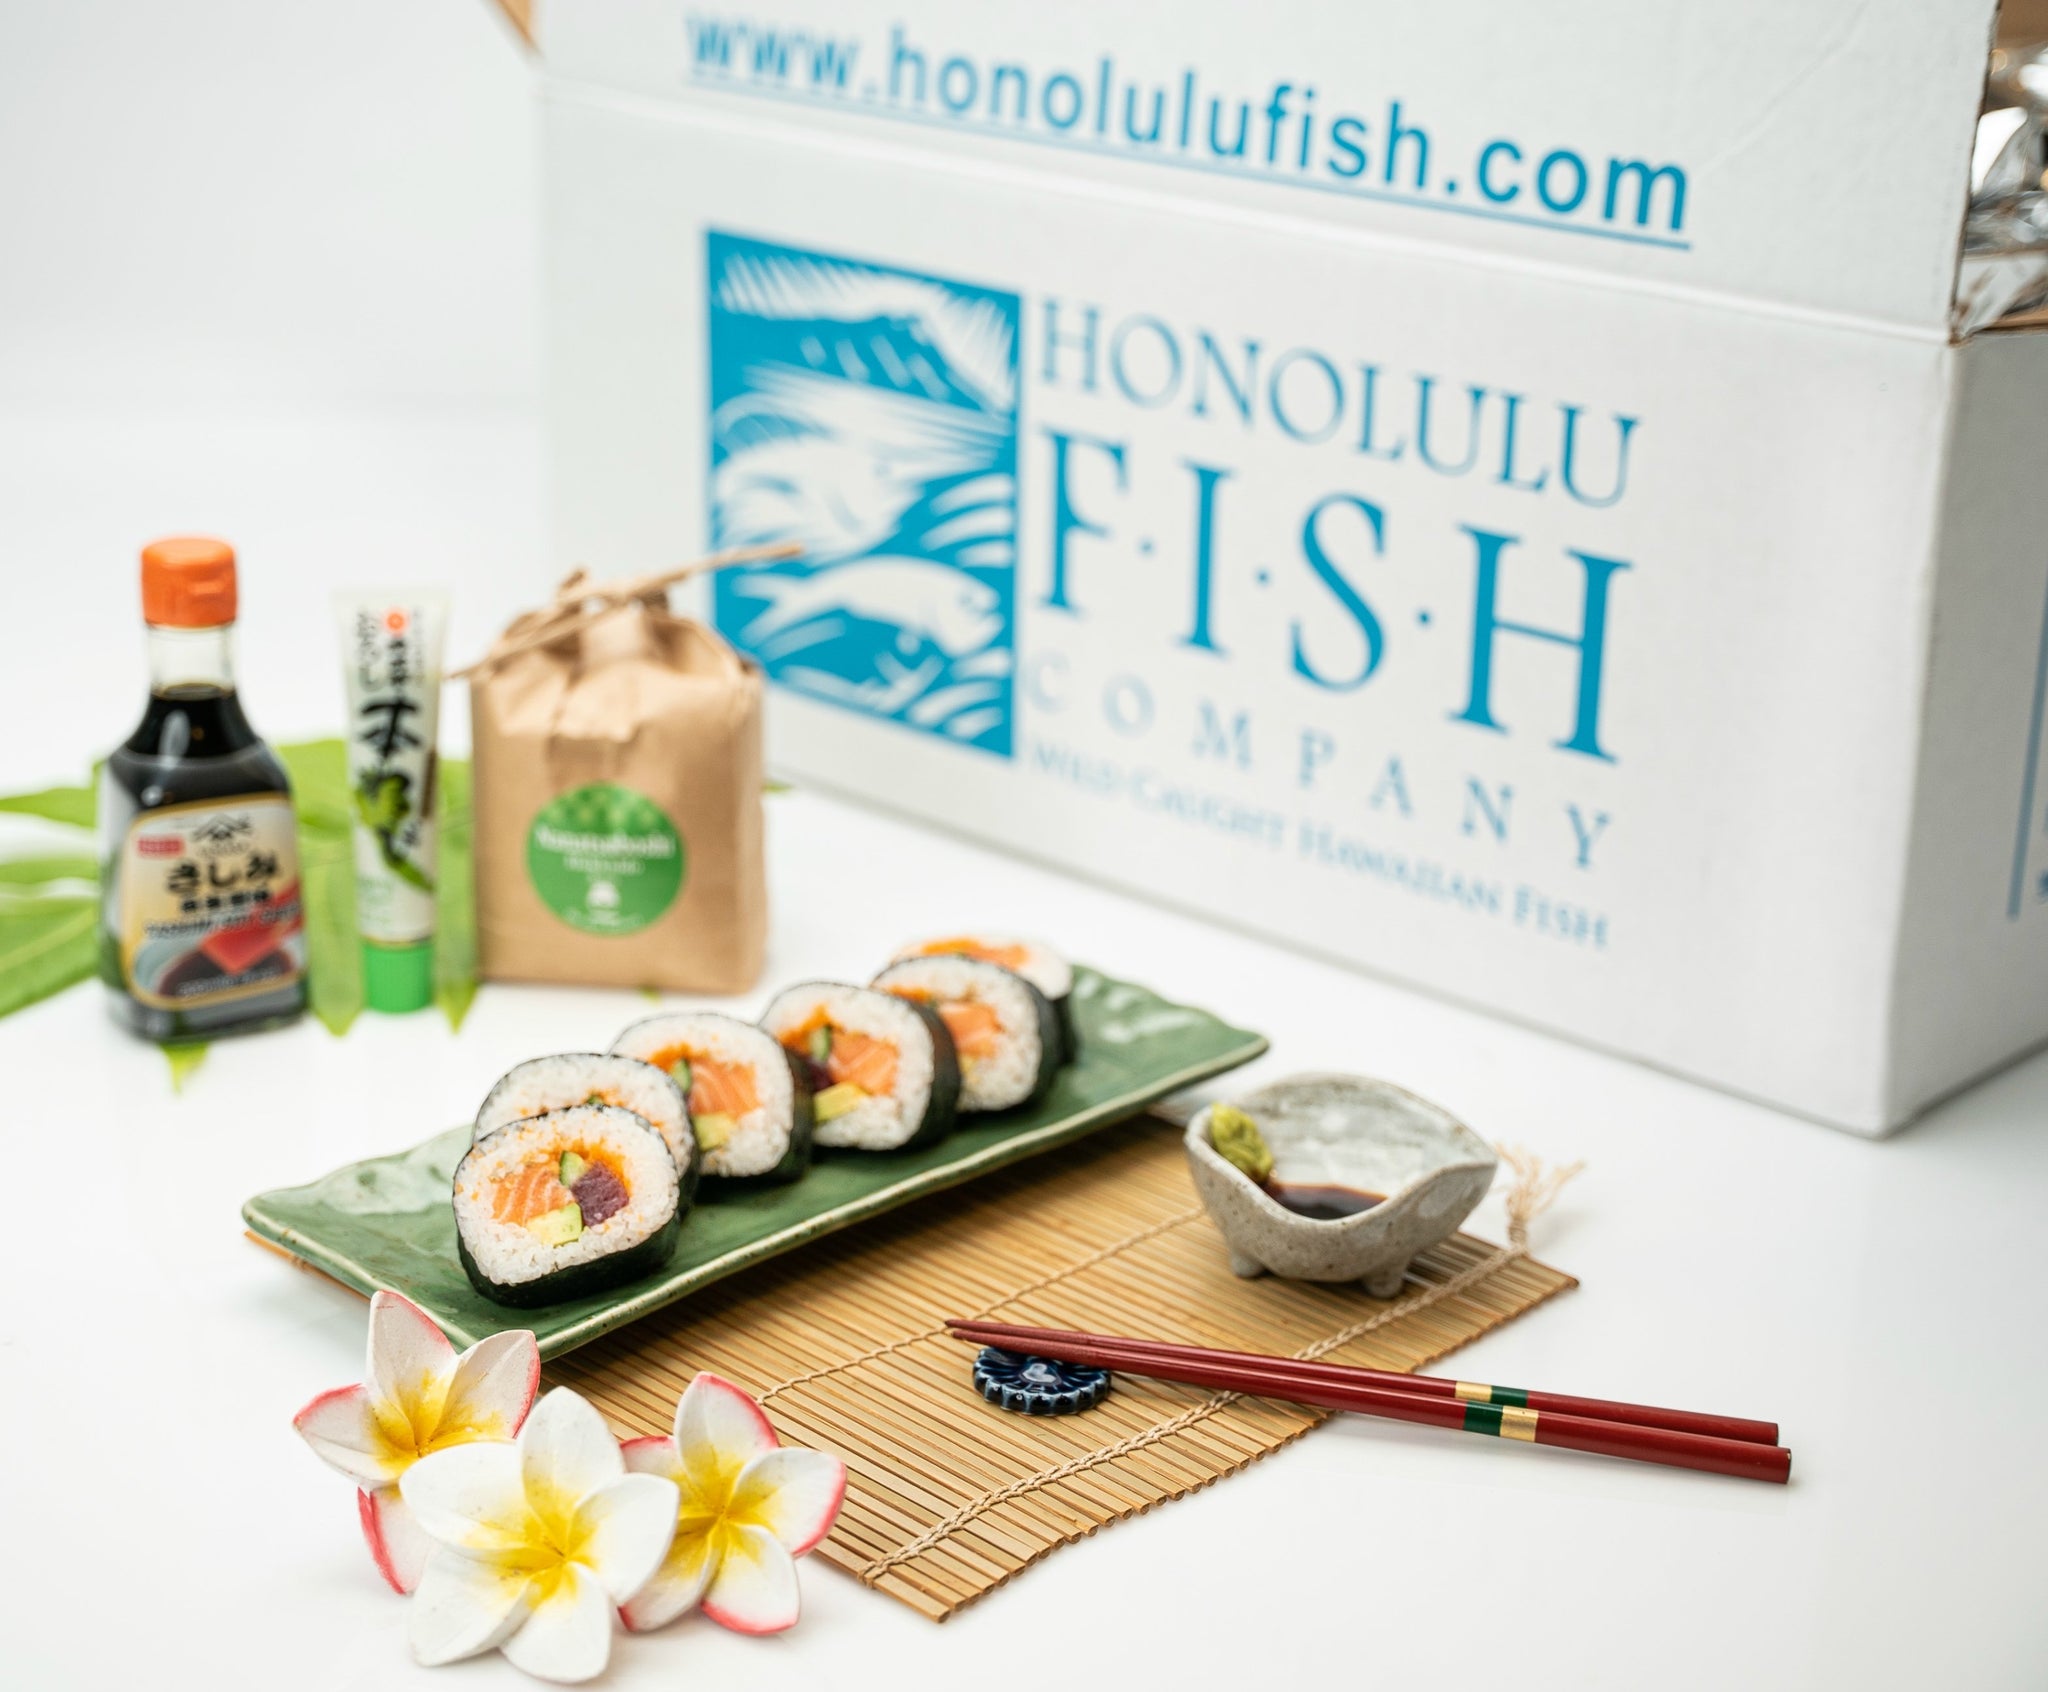 Sushi set featuring sushi, roll, and salmon